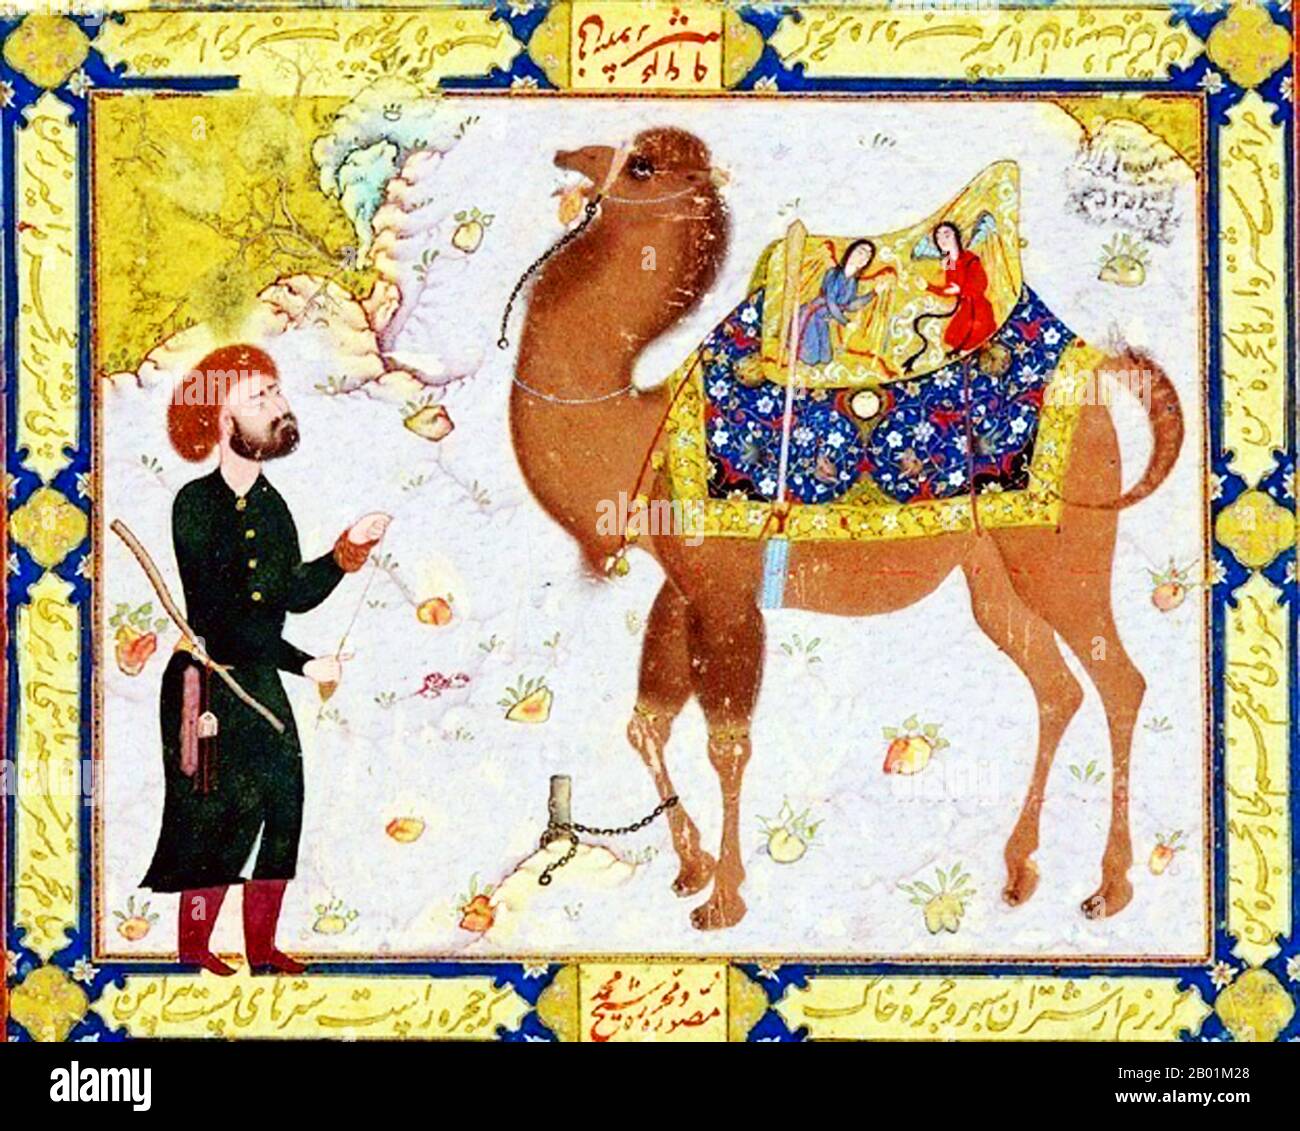 Iran/Persia: Camel and keeper. Watercolour painting by Shaykh Muhammad (fl. 16th century), c. 1556-1557.  A Persian miniature is a small painting on paper, whether a book illustration or a separate work of art intended to be kept in an album of such works called a muraqqa. The techniques are broadly comparable to the Western and Byzantine traditions of miniatures in illuminated manuscripts. Although there is an equally well-established Persian tradition of wall-painting, the survival rate and state of preservation of miniatures is better. Stock Photo